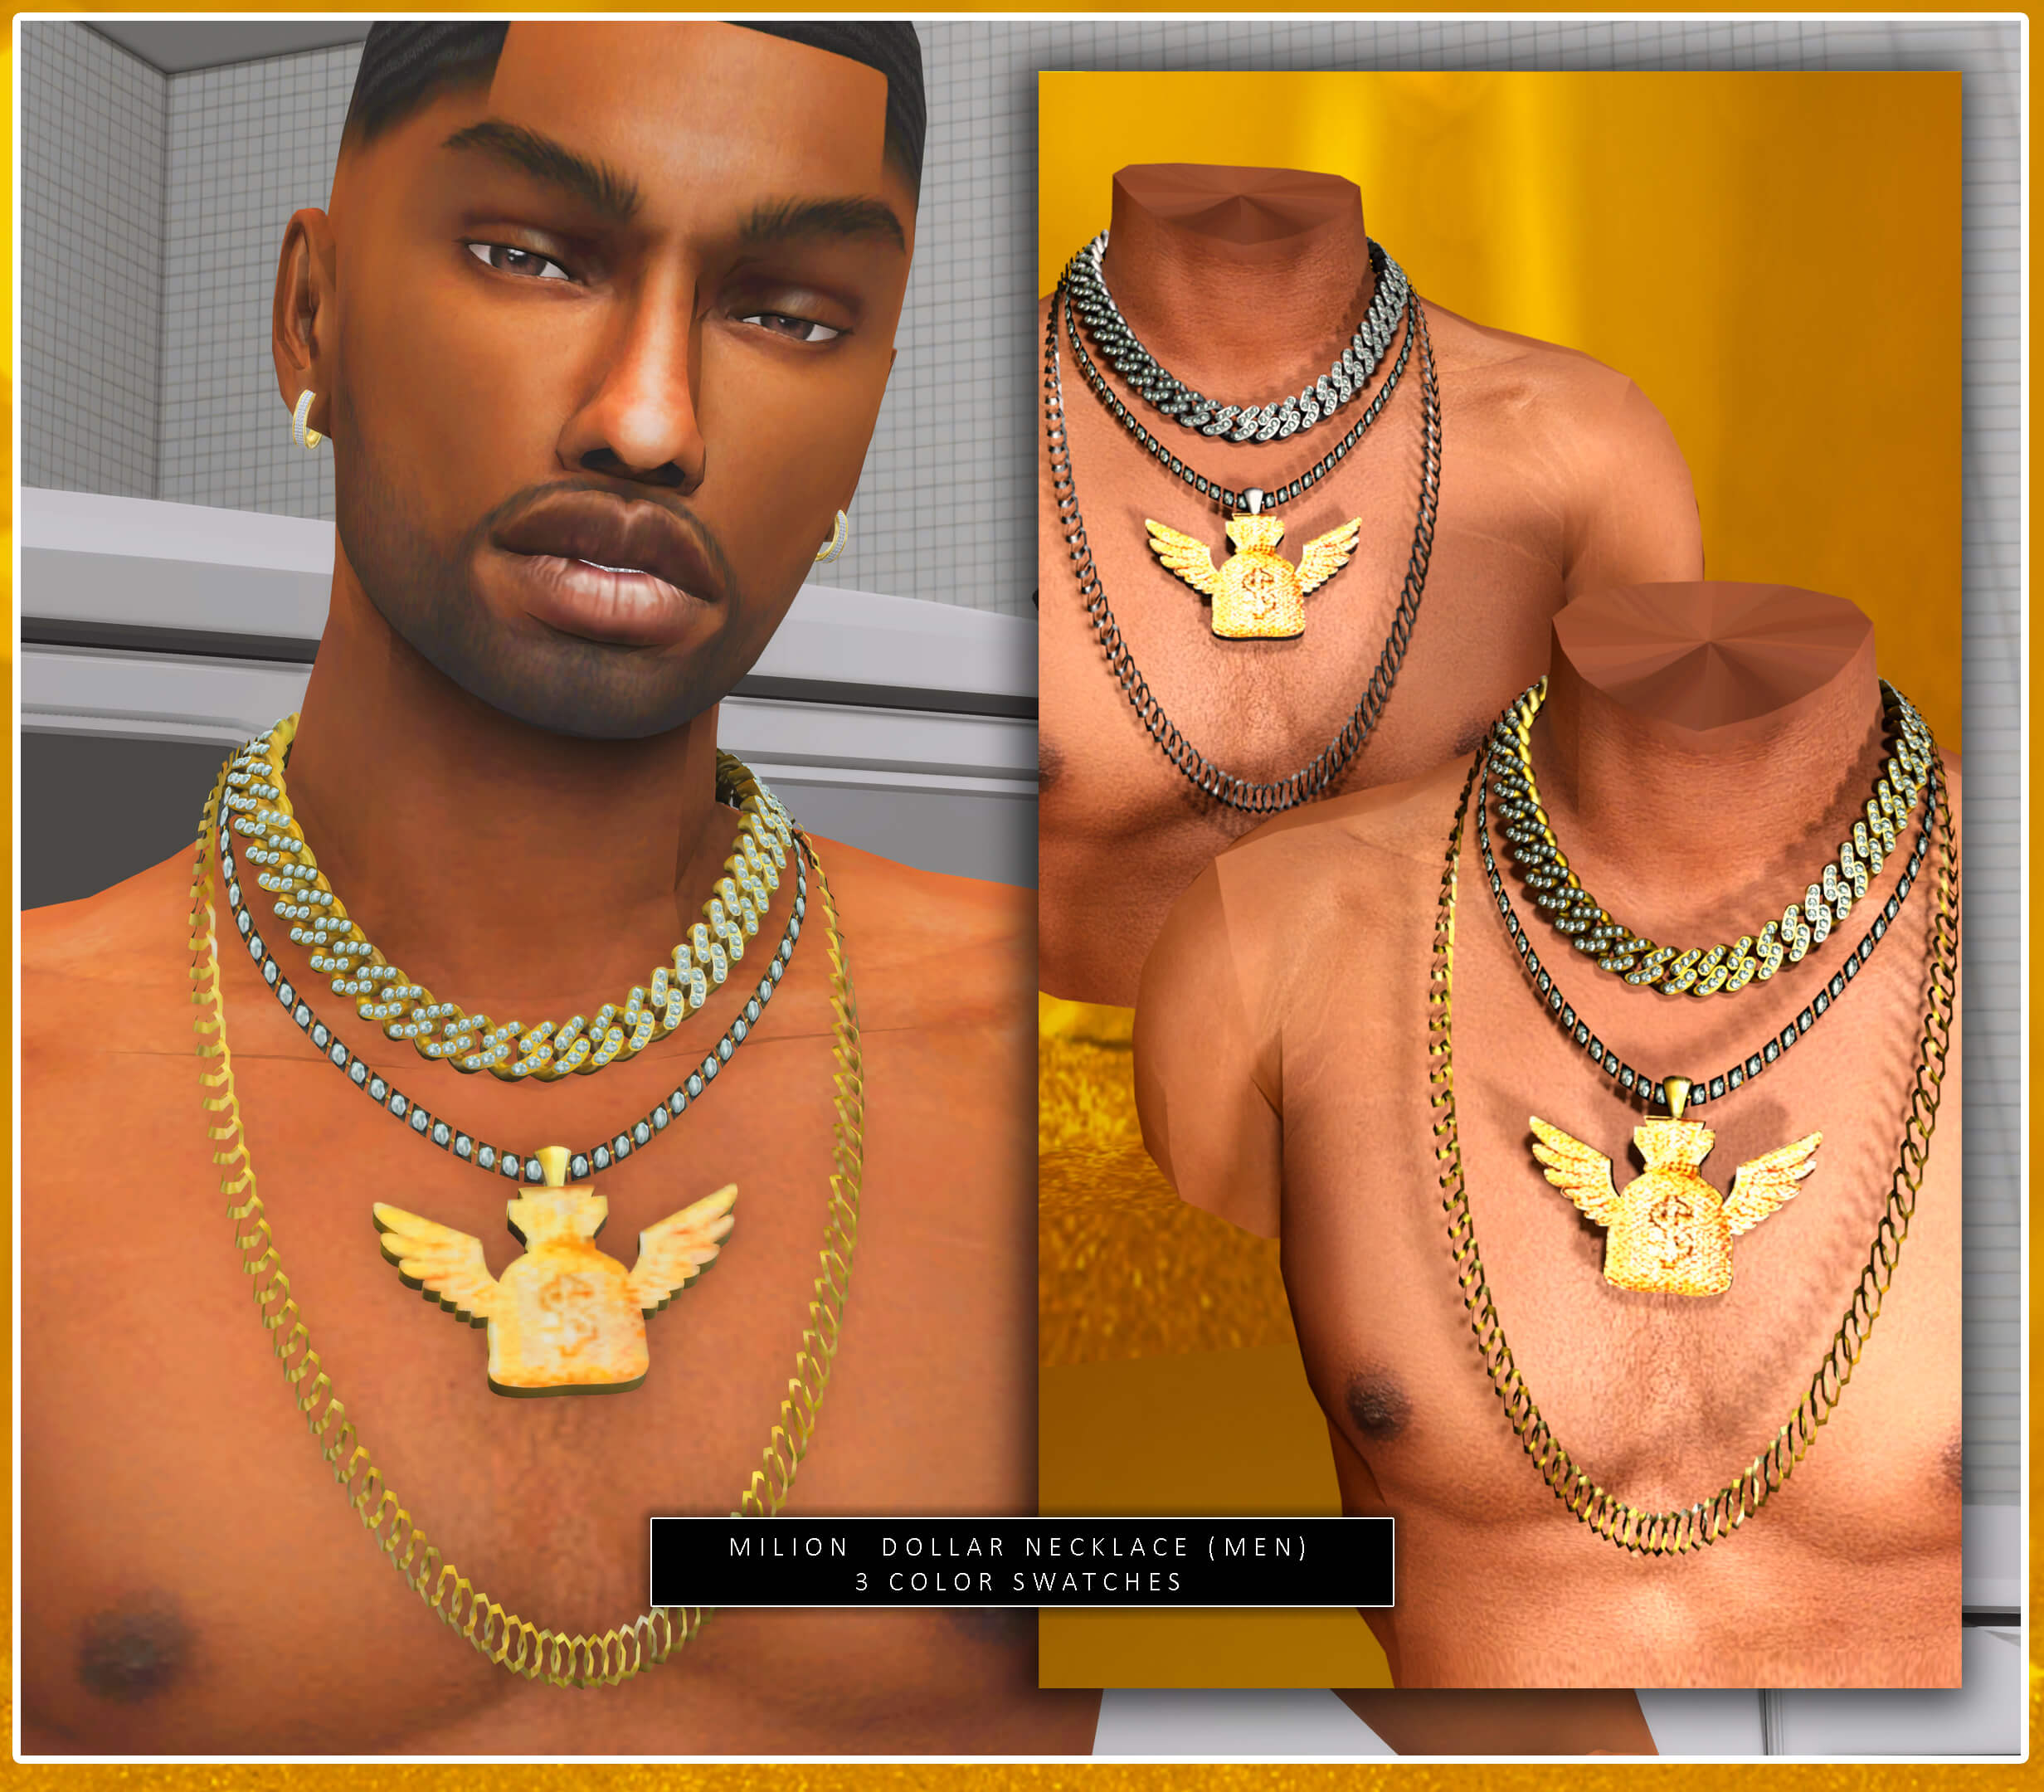 The Sims Book | Sims 4 MILLION DOLLAR NECKLACE (MEN)